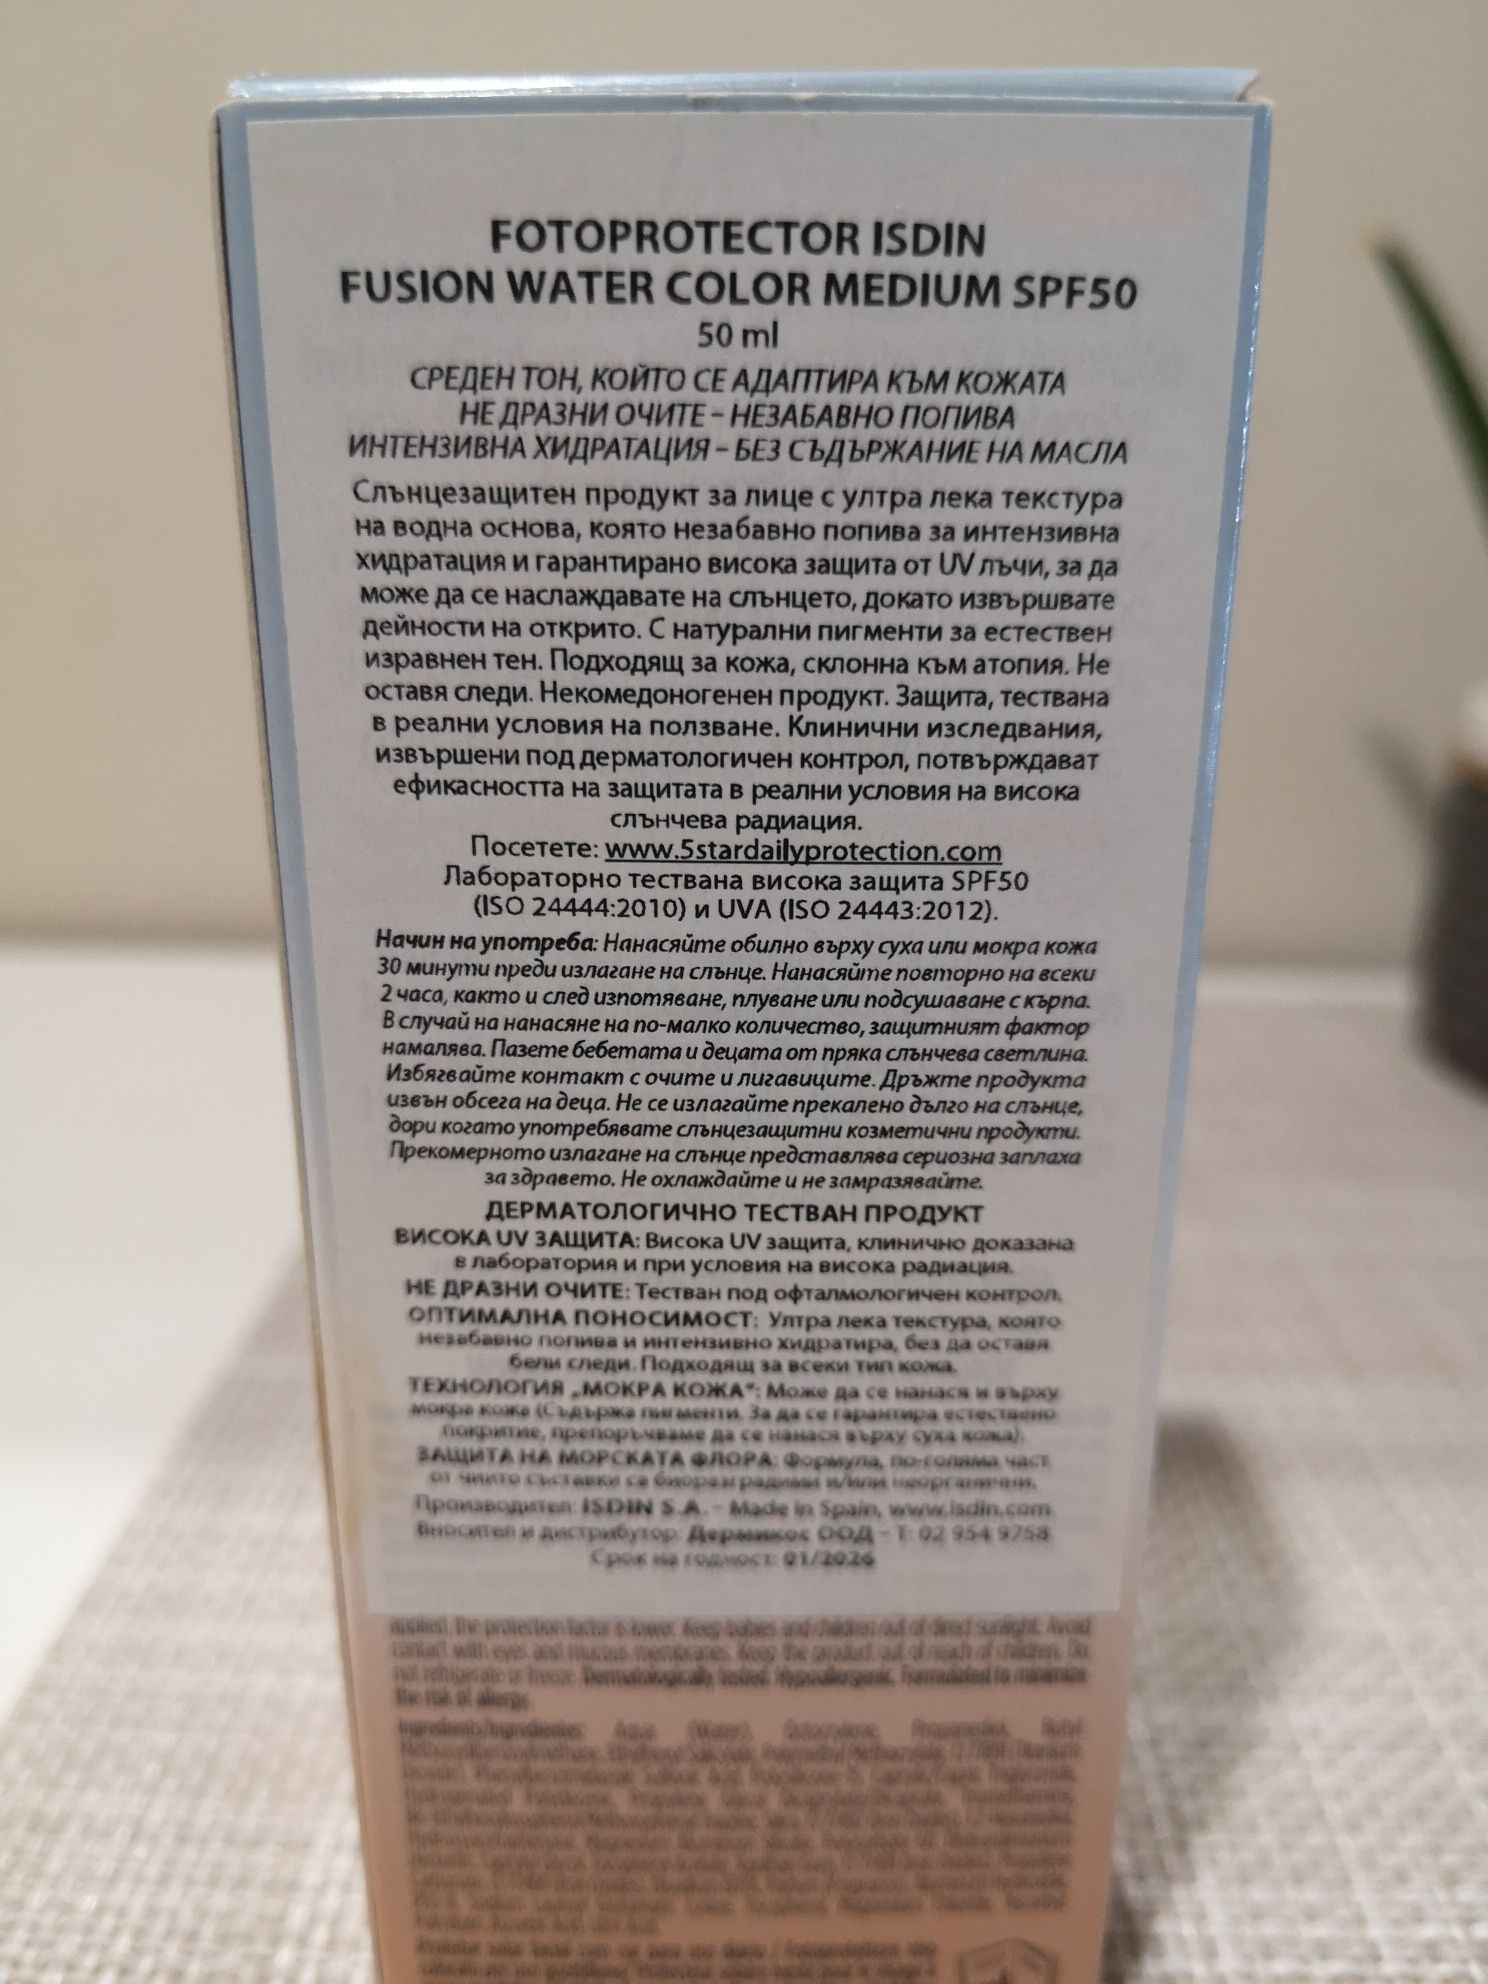 Isdin SPF 50 fusion water color